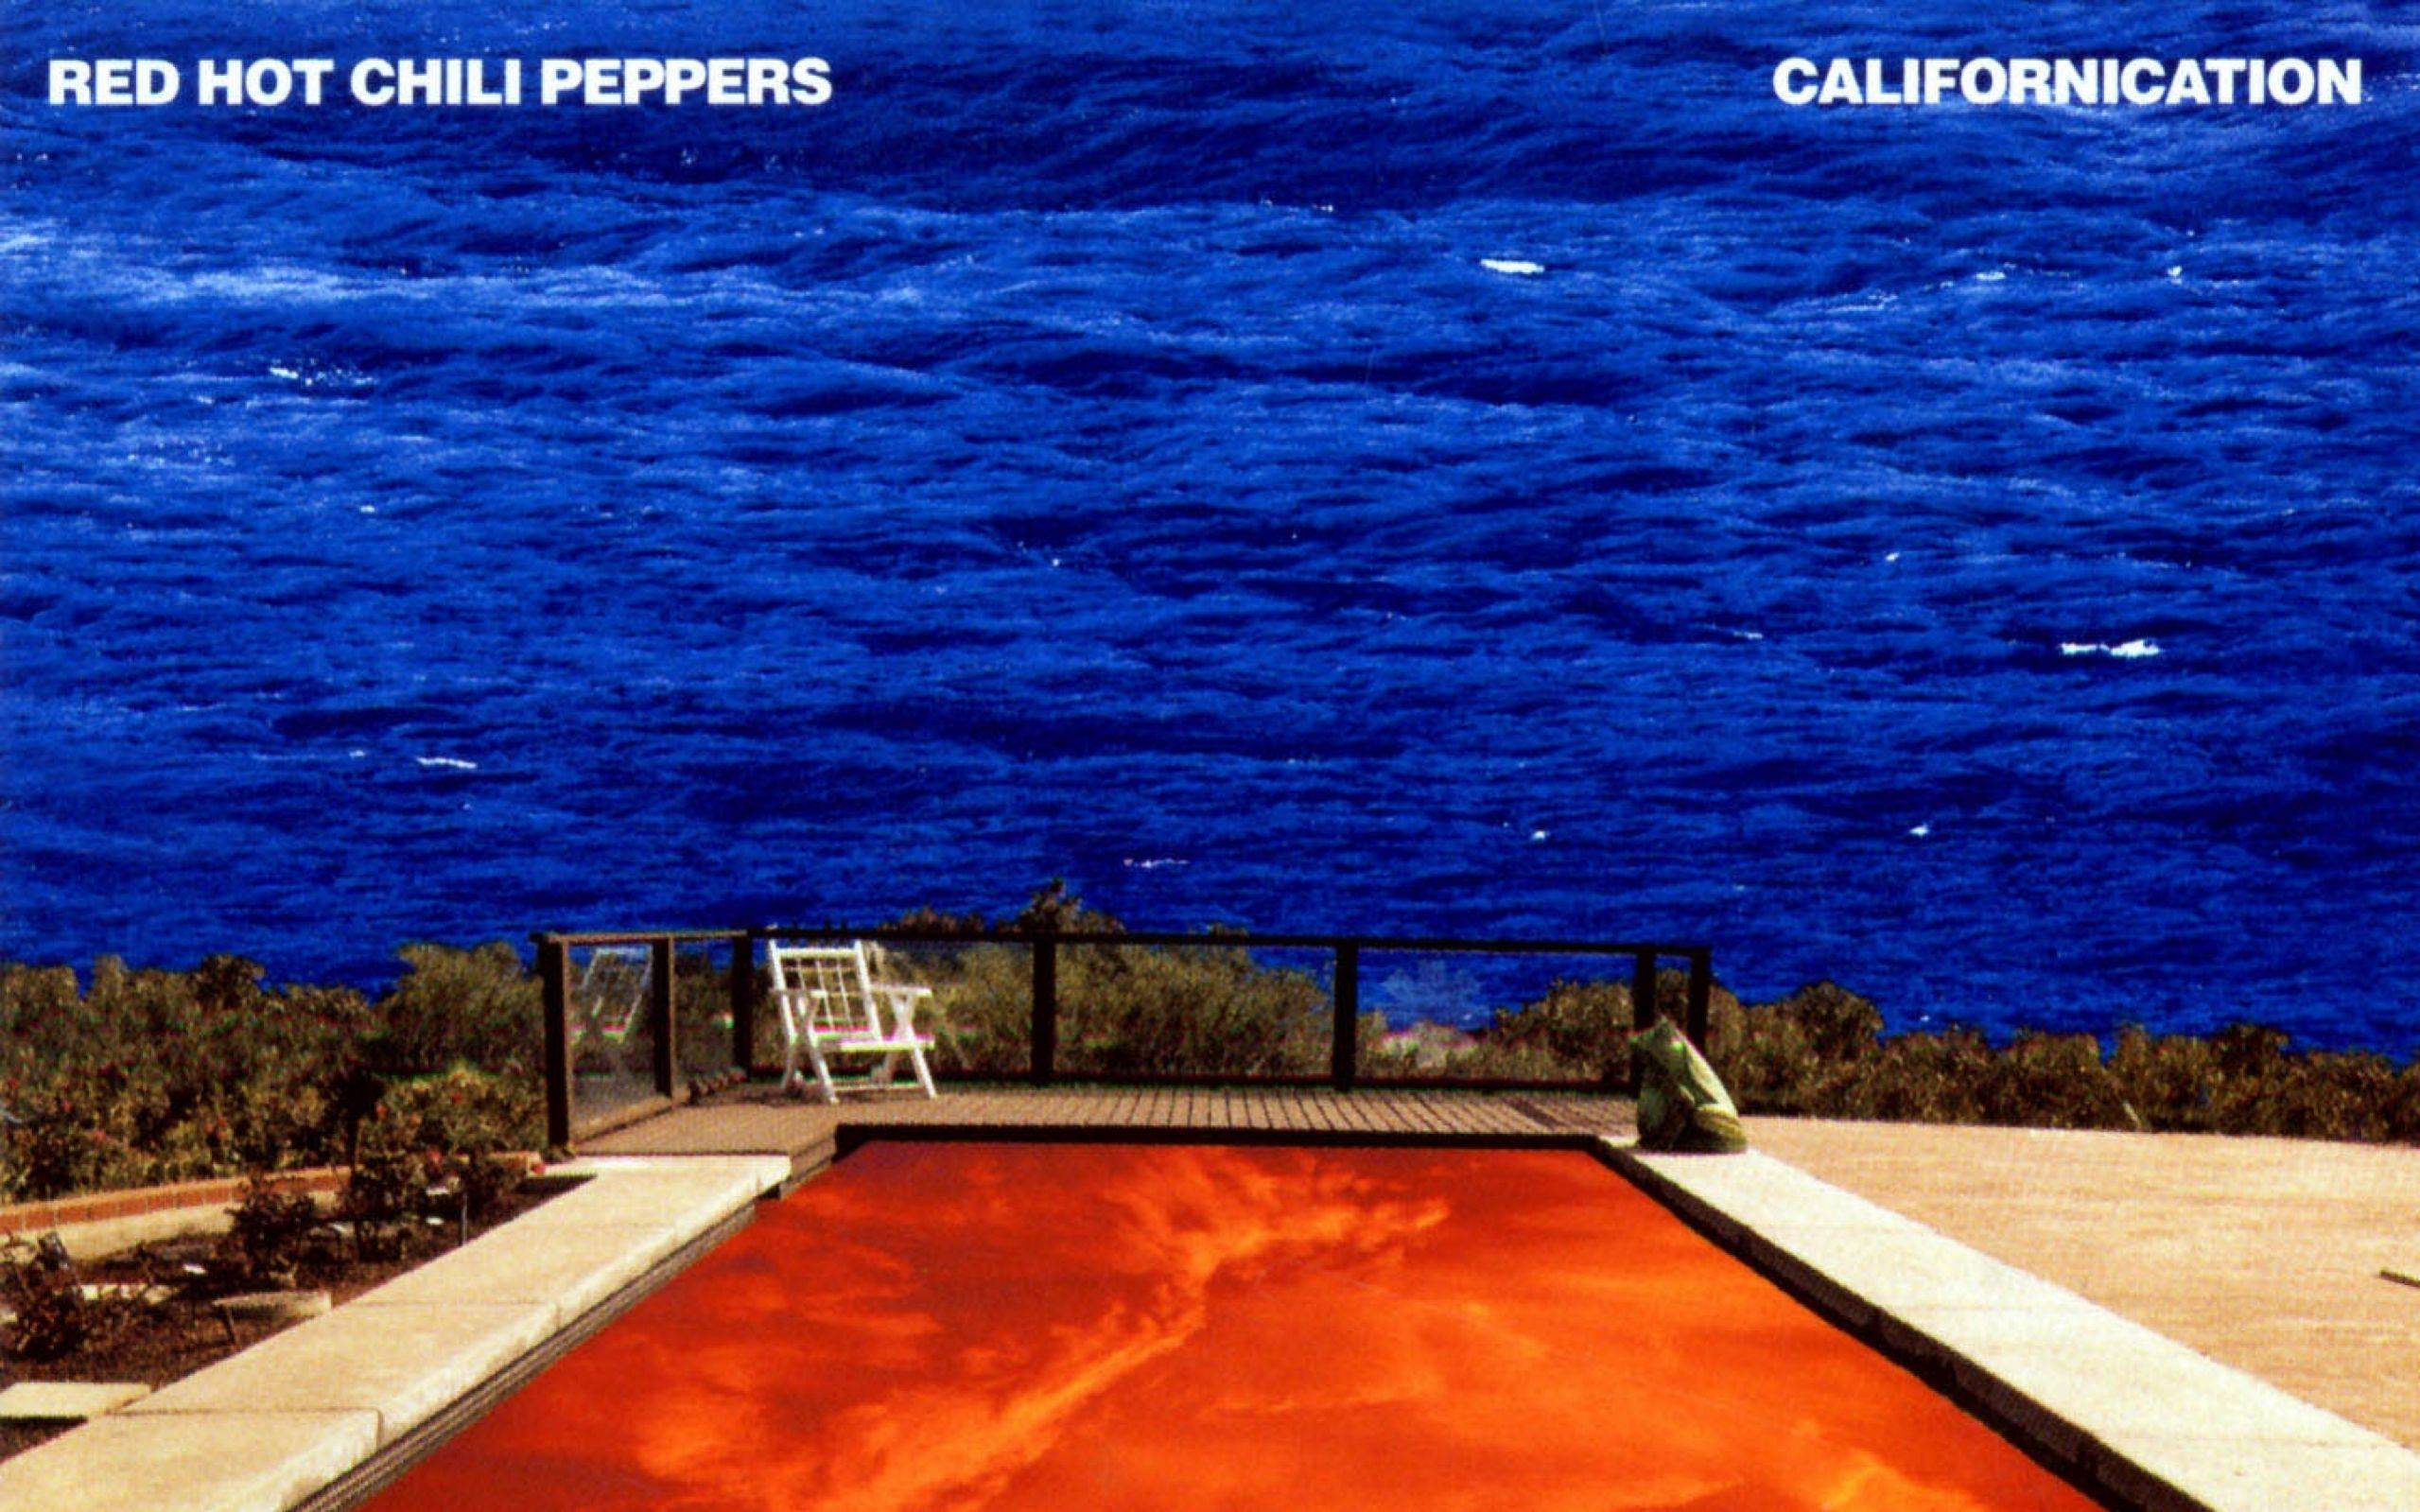 Any Good HD Californication Wallpaper Redhotchilipeppers